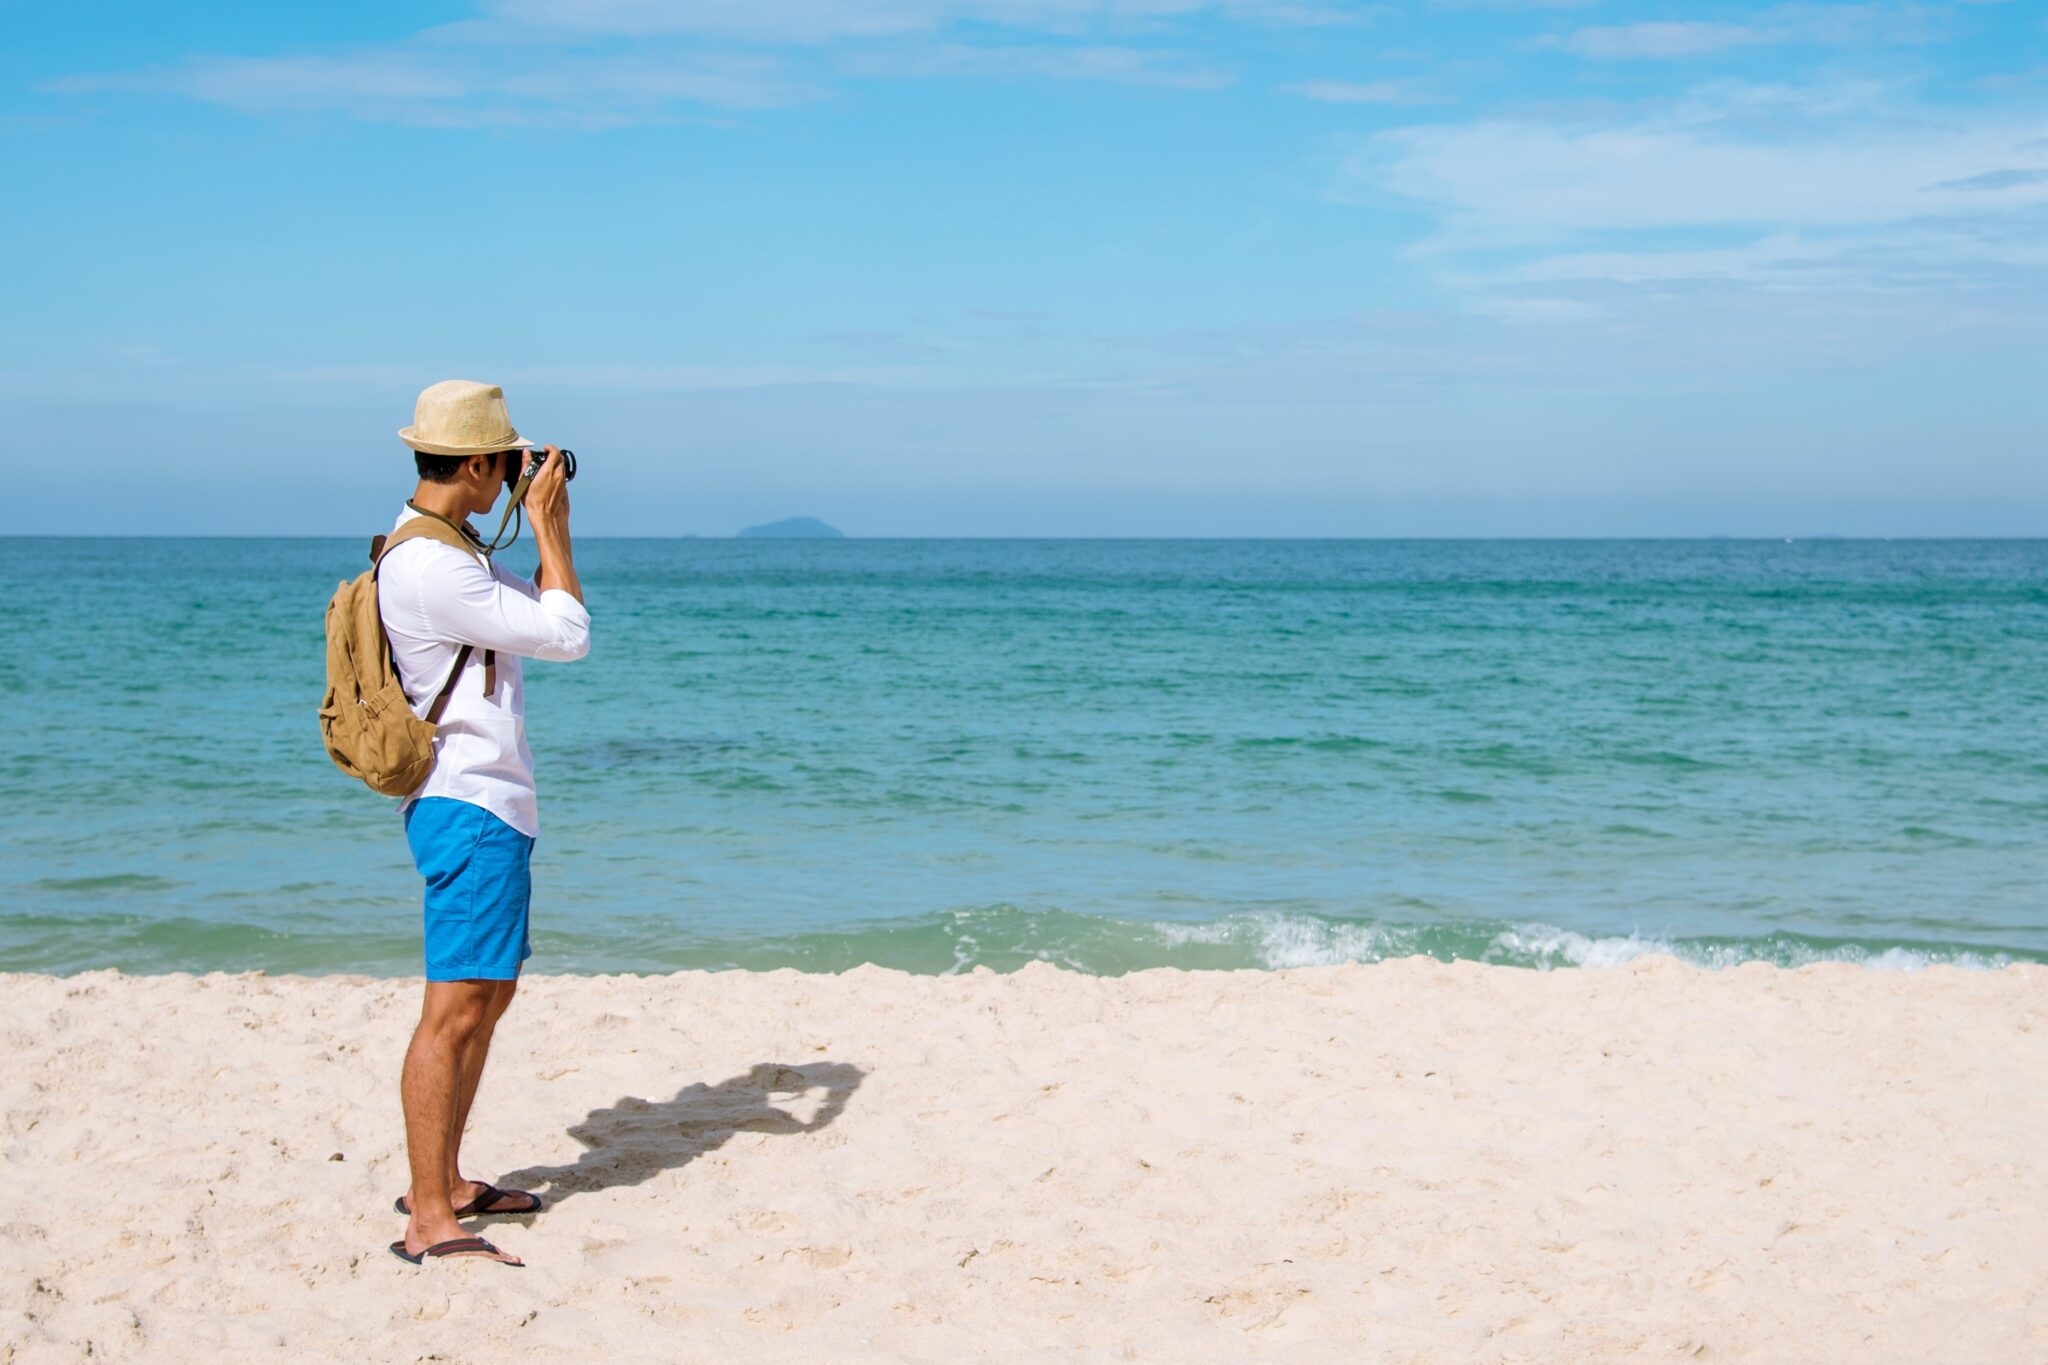 A man on the beach taking photos of the sea